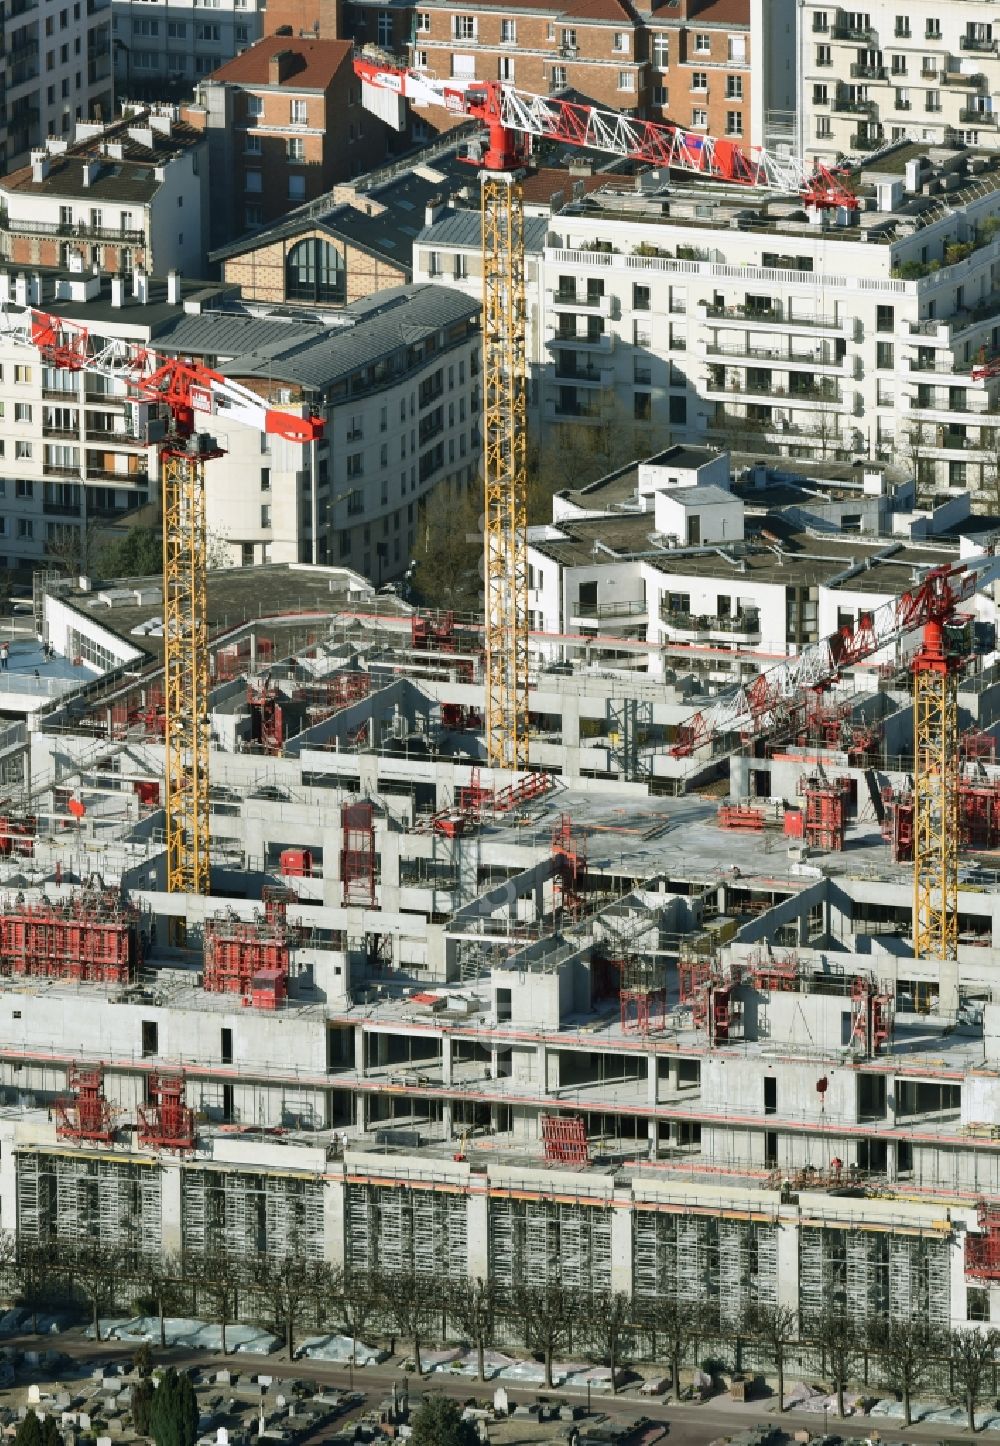 Aerial image Levallois-Perret - Construction site to build a new multi-family residential complex Rue Jules Guesde in Levallois-Perret in Ile-de-France, France